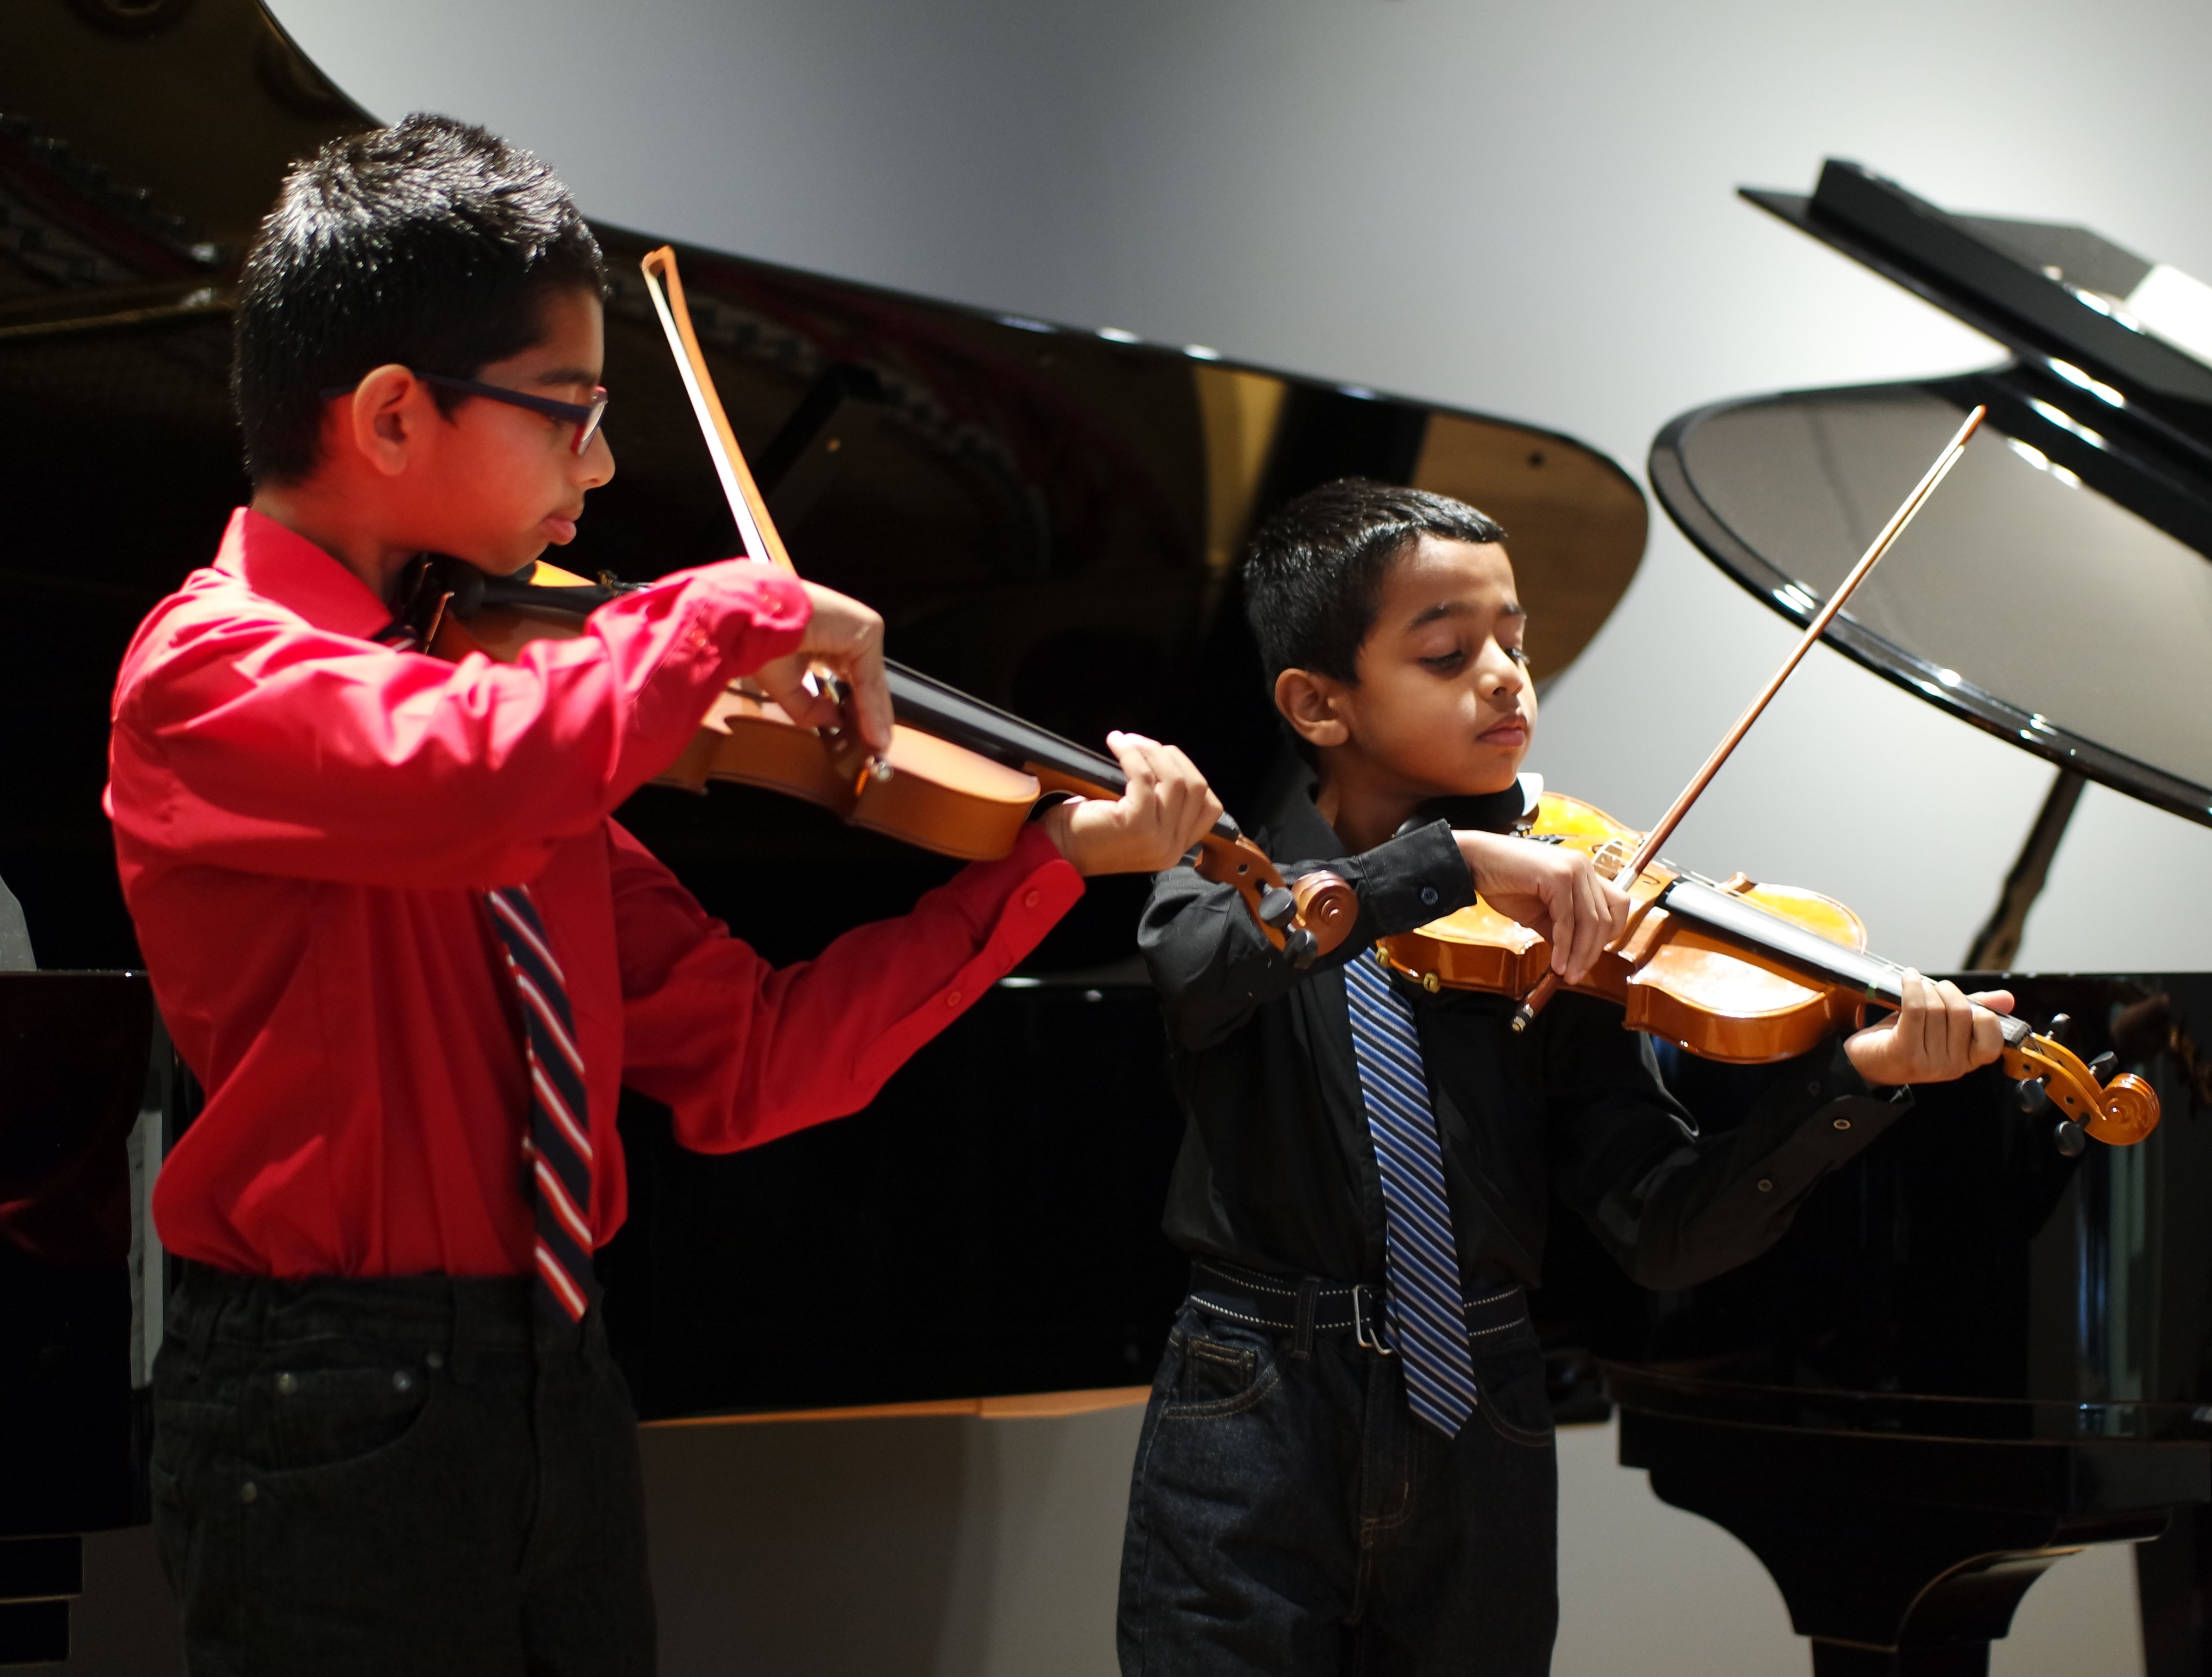 Marina del Rey Violin Lessons for Children and Adults